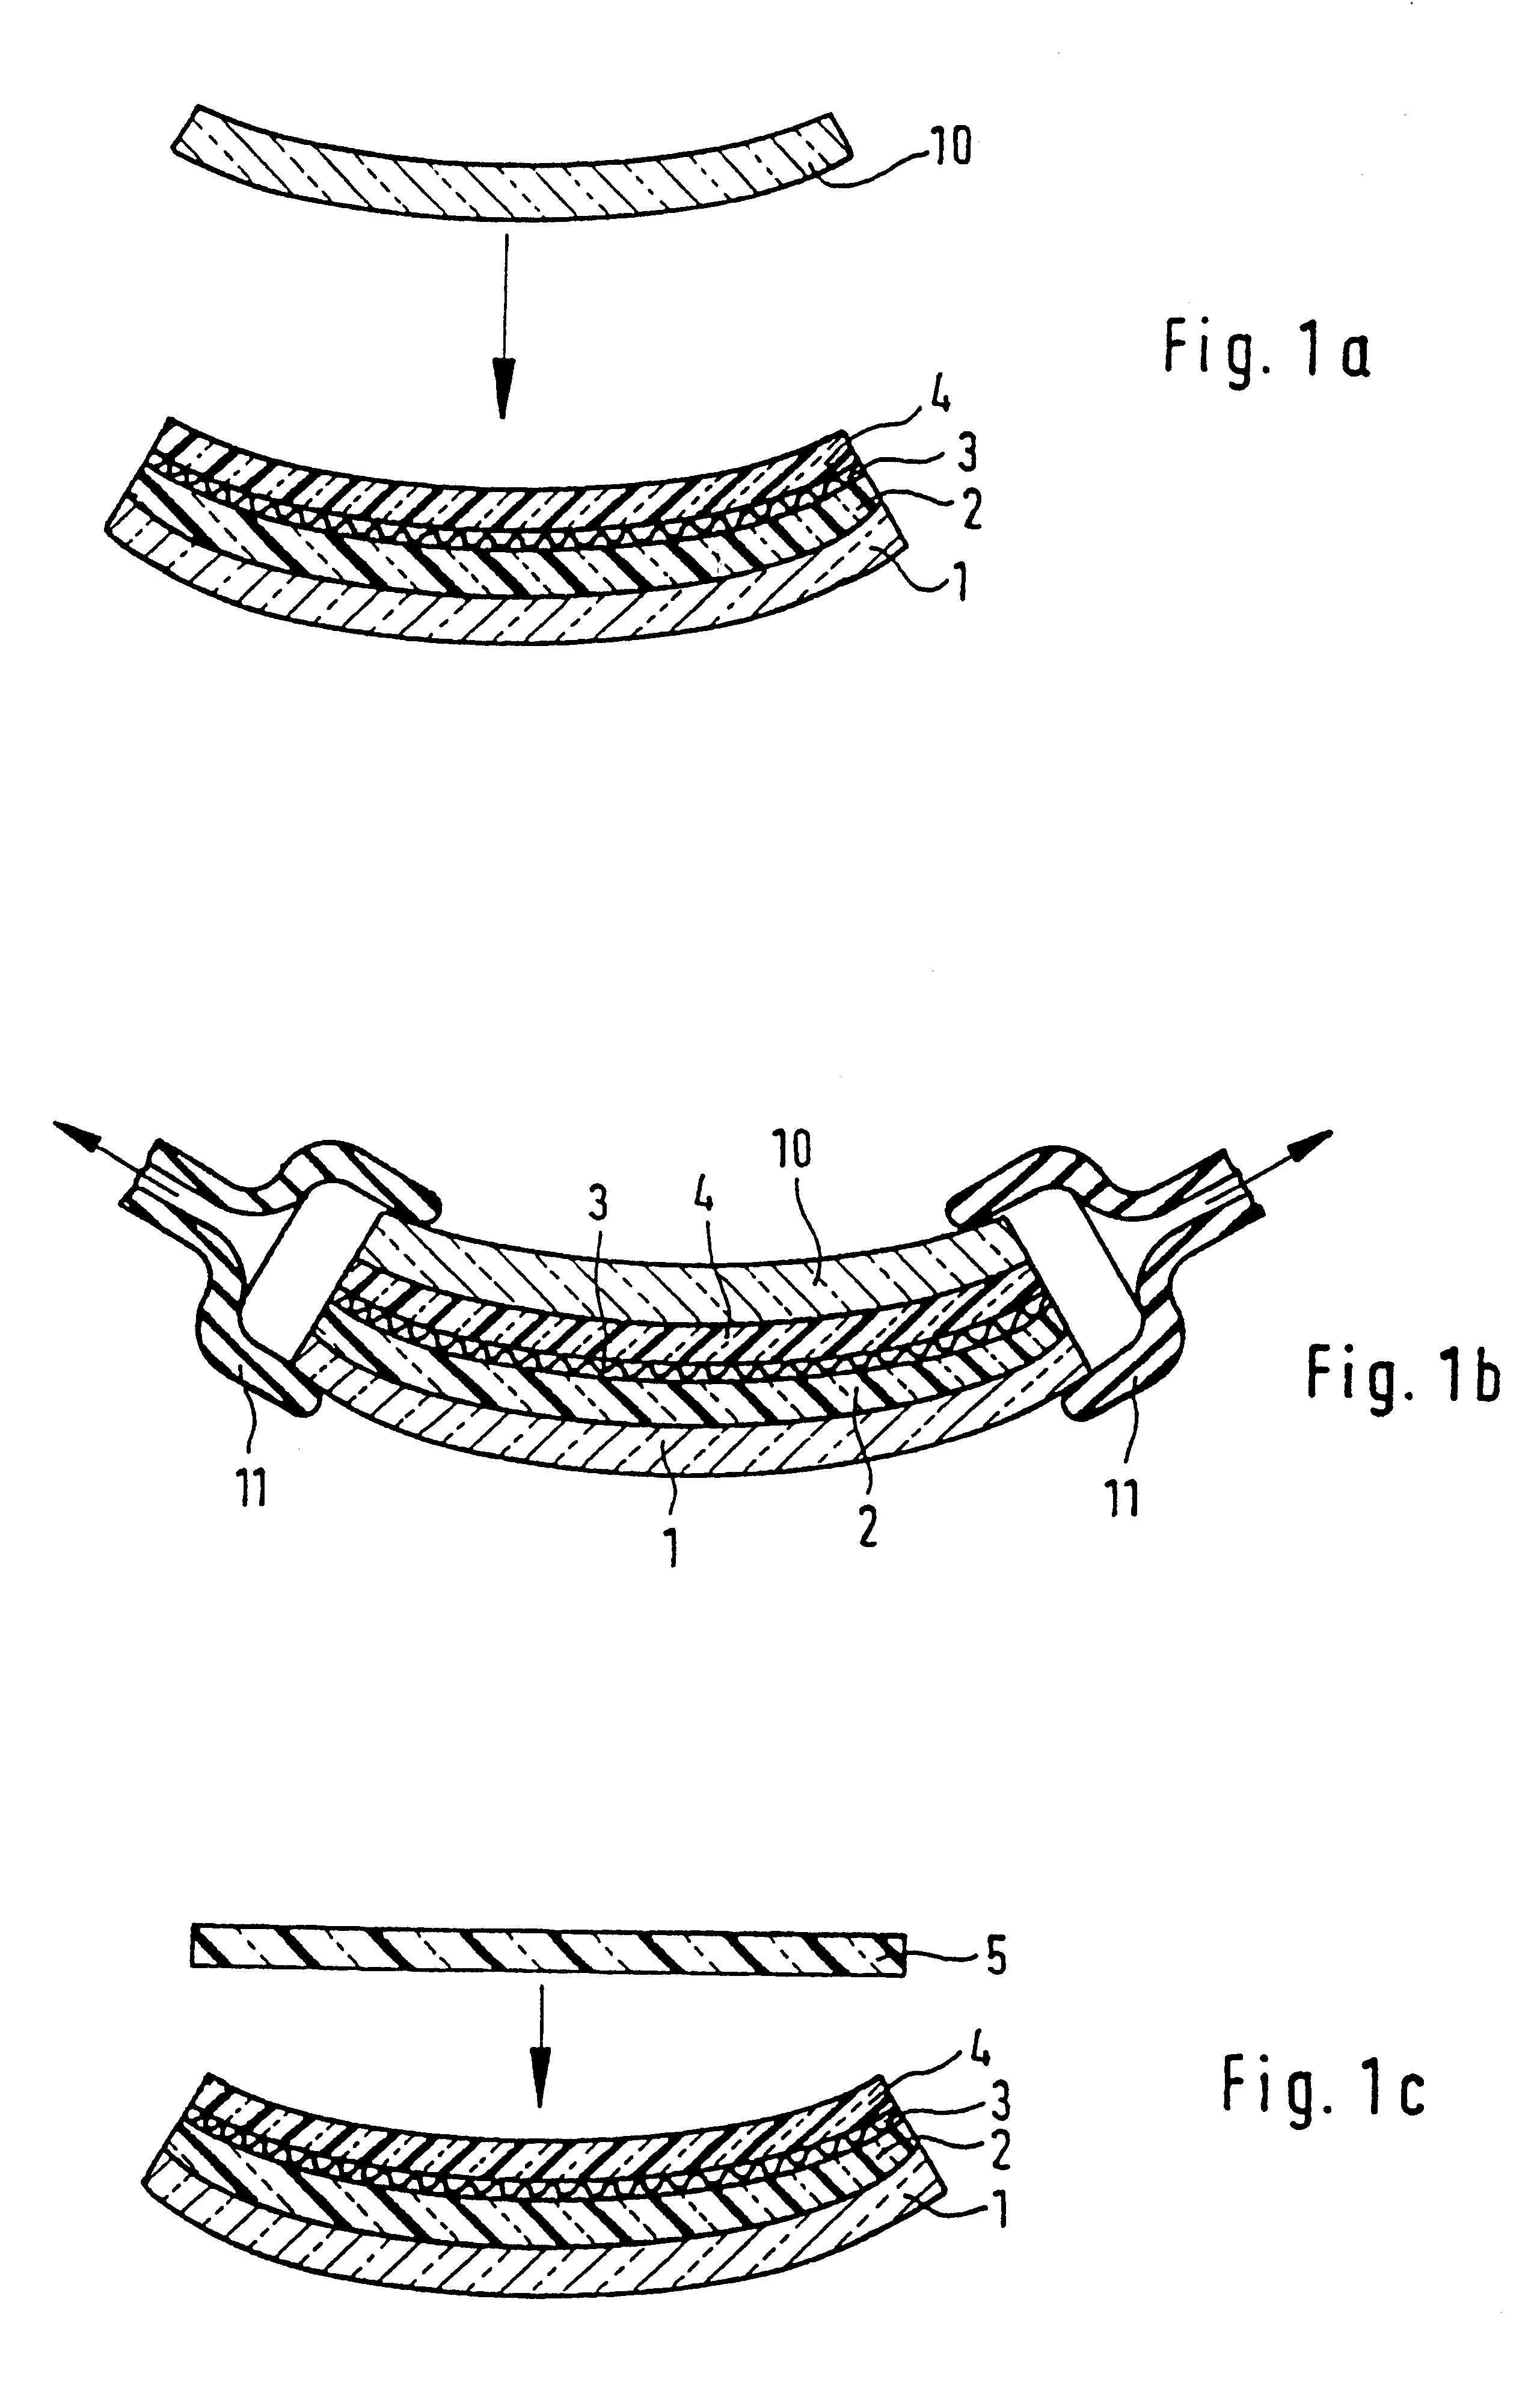 Process for producing a curved laminated safety glass sheet